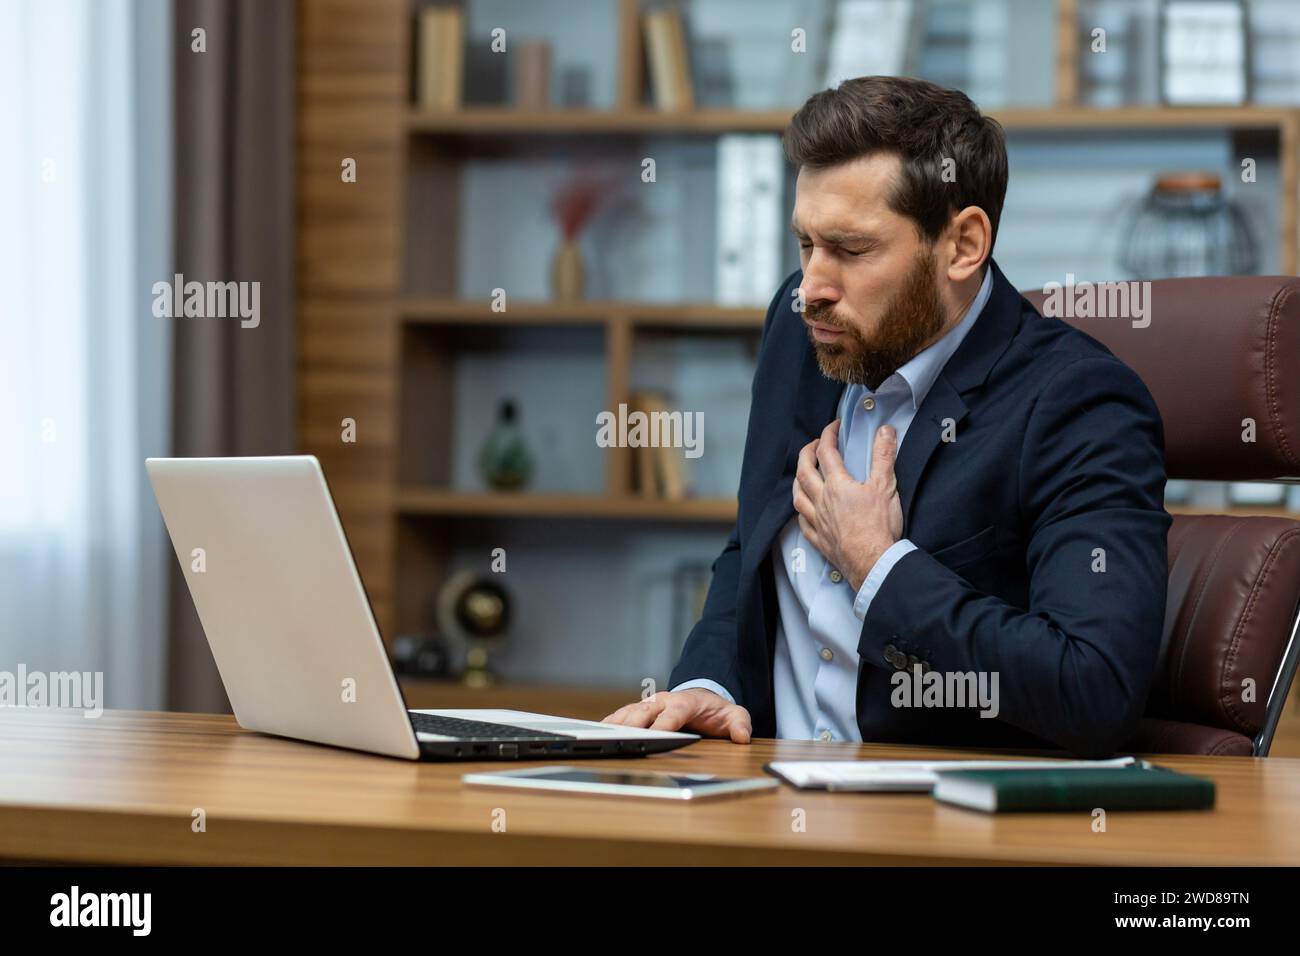 Mature businessman in a home office setup looks distressed, clutching his chest as if experiencing discomfort or pain. Stock Photo